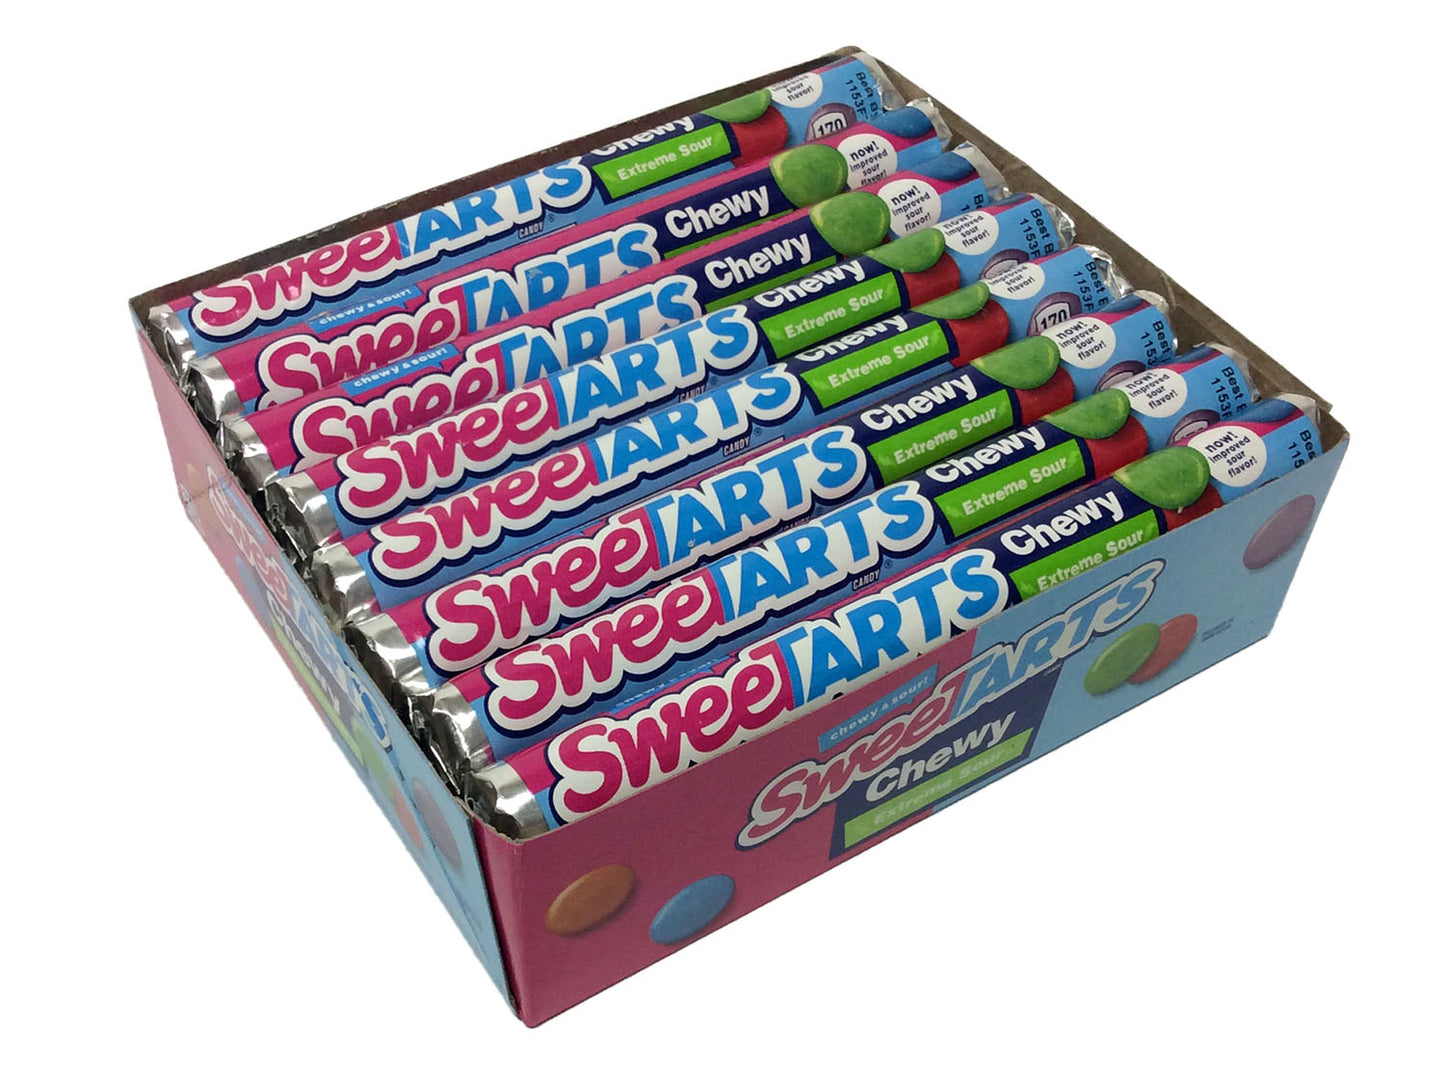 Sweetarts Chewy Extreme Sours (Shockers) - 1.8 oz roll - box of 36